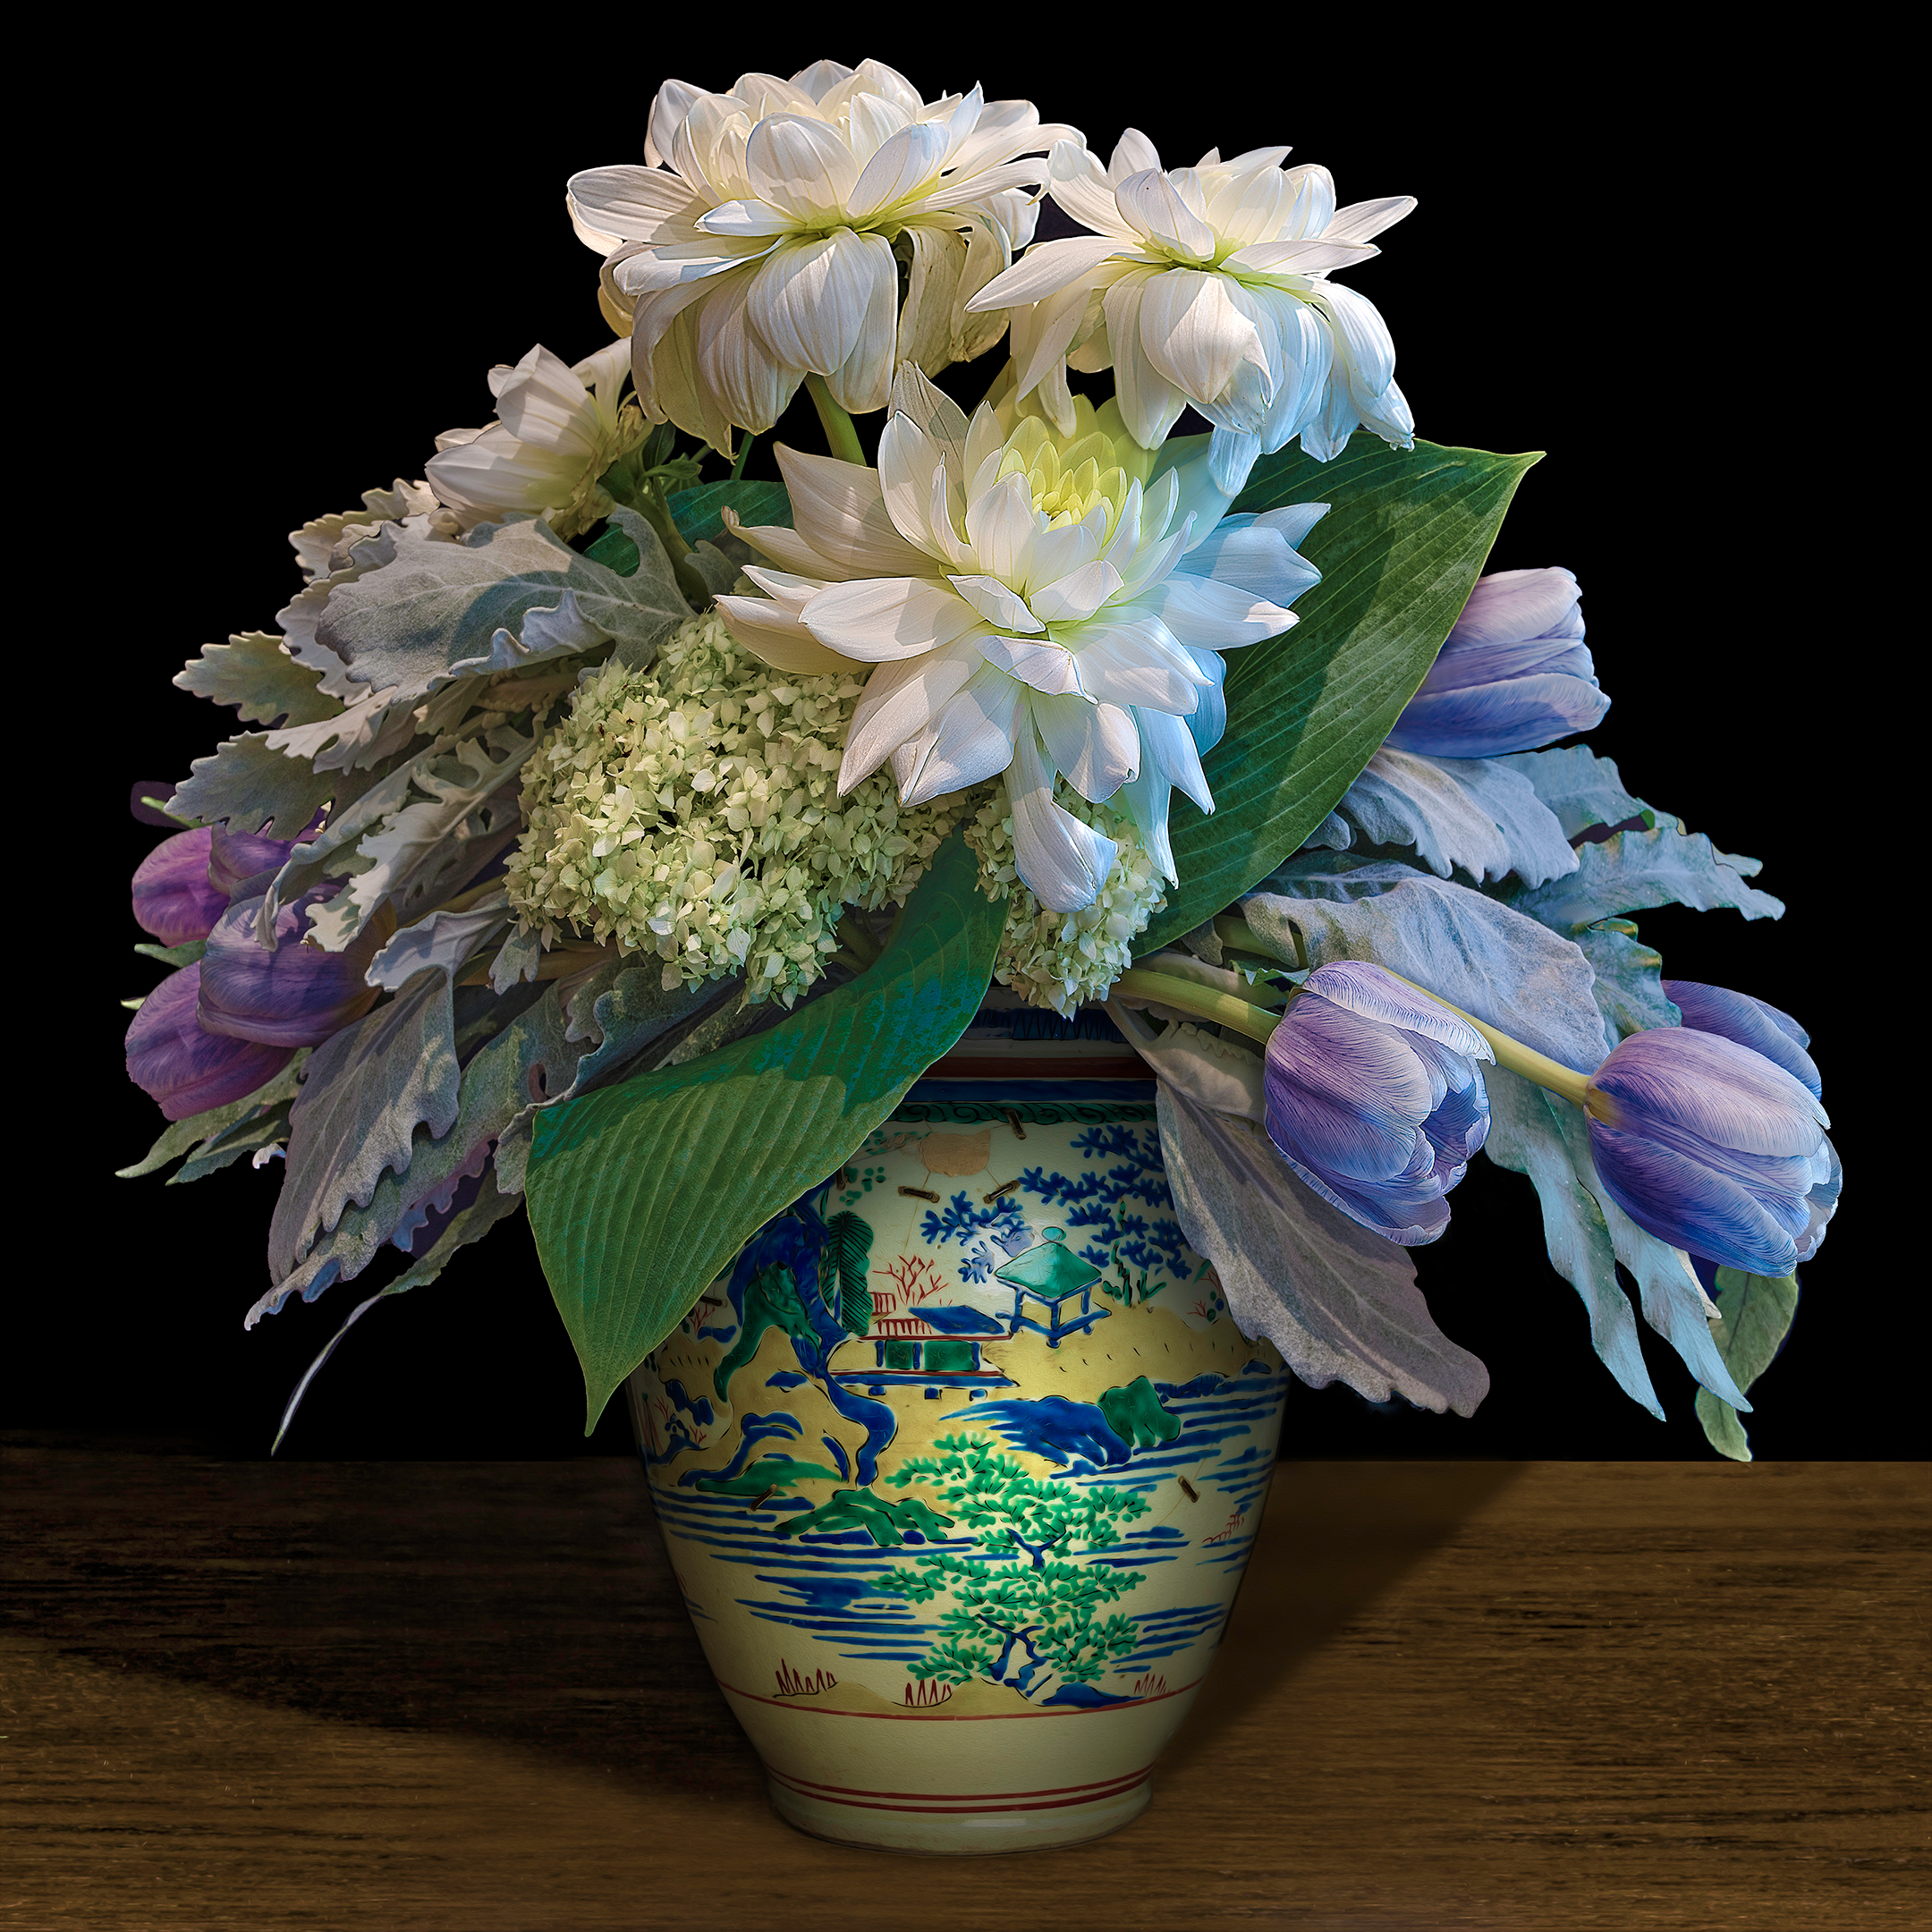     T.M. Glass, Dahlias, Tulips, and Hydrangeas in a Japanese Vase, 2021

